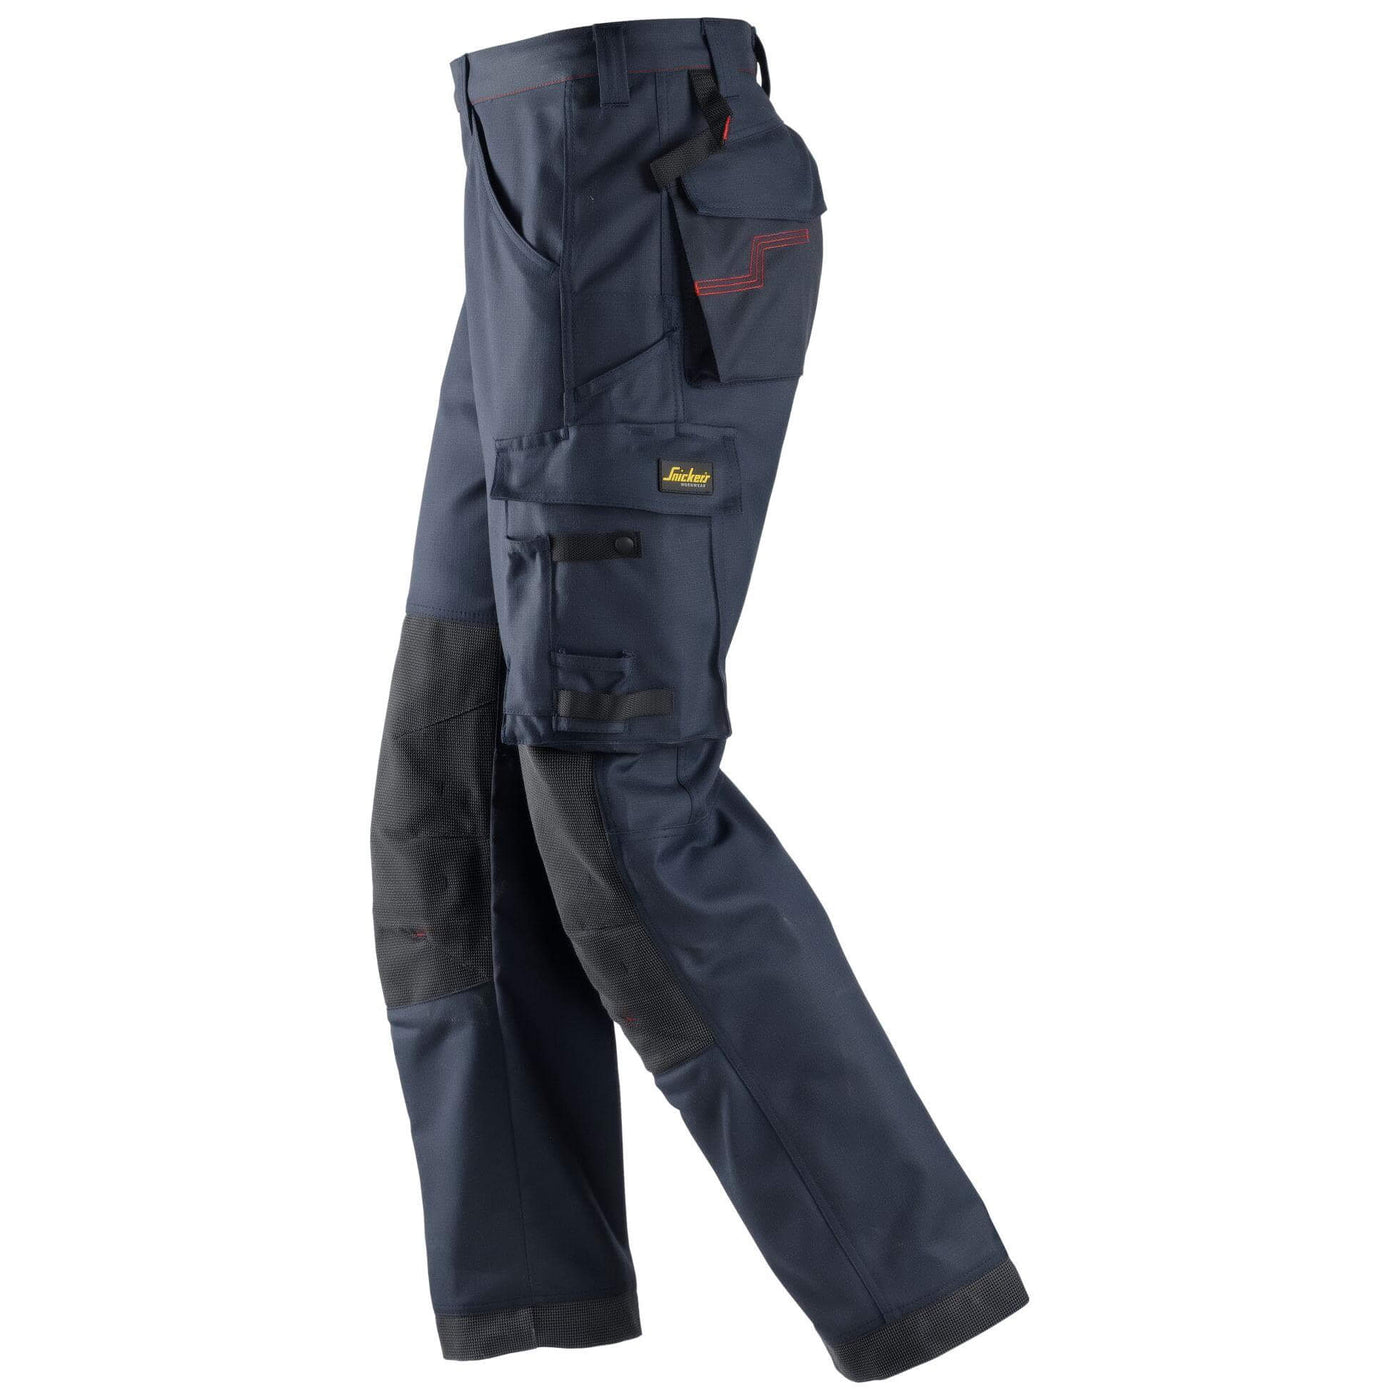 Snickers 6362 ProtecWork Work Trousers Equal Leg Pockets Navy left #colour_navy